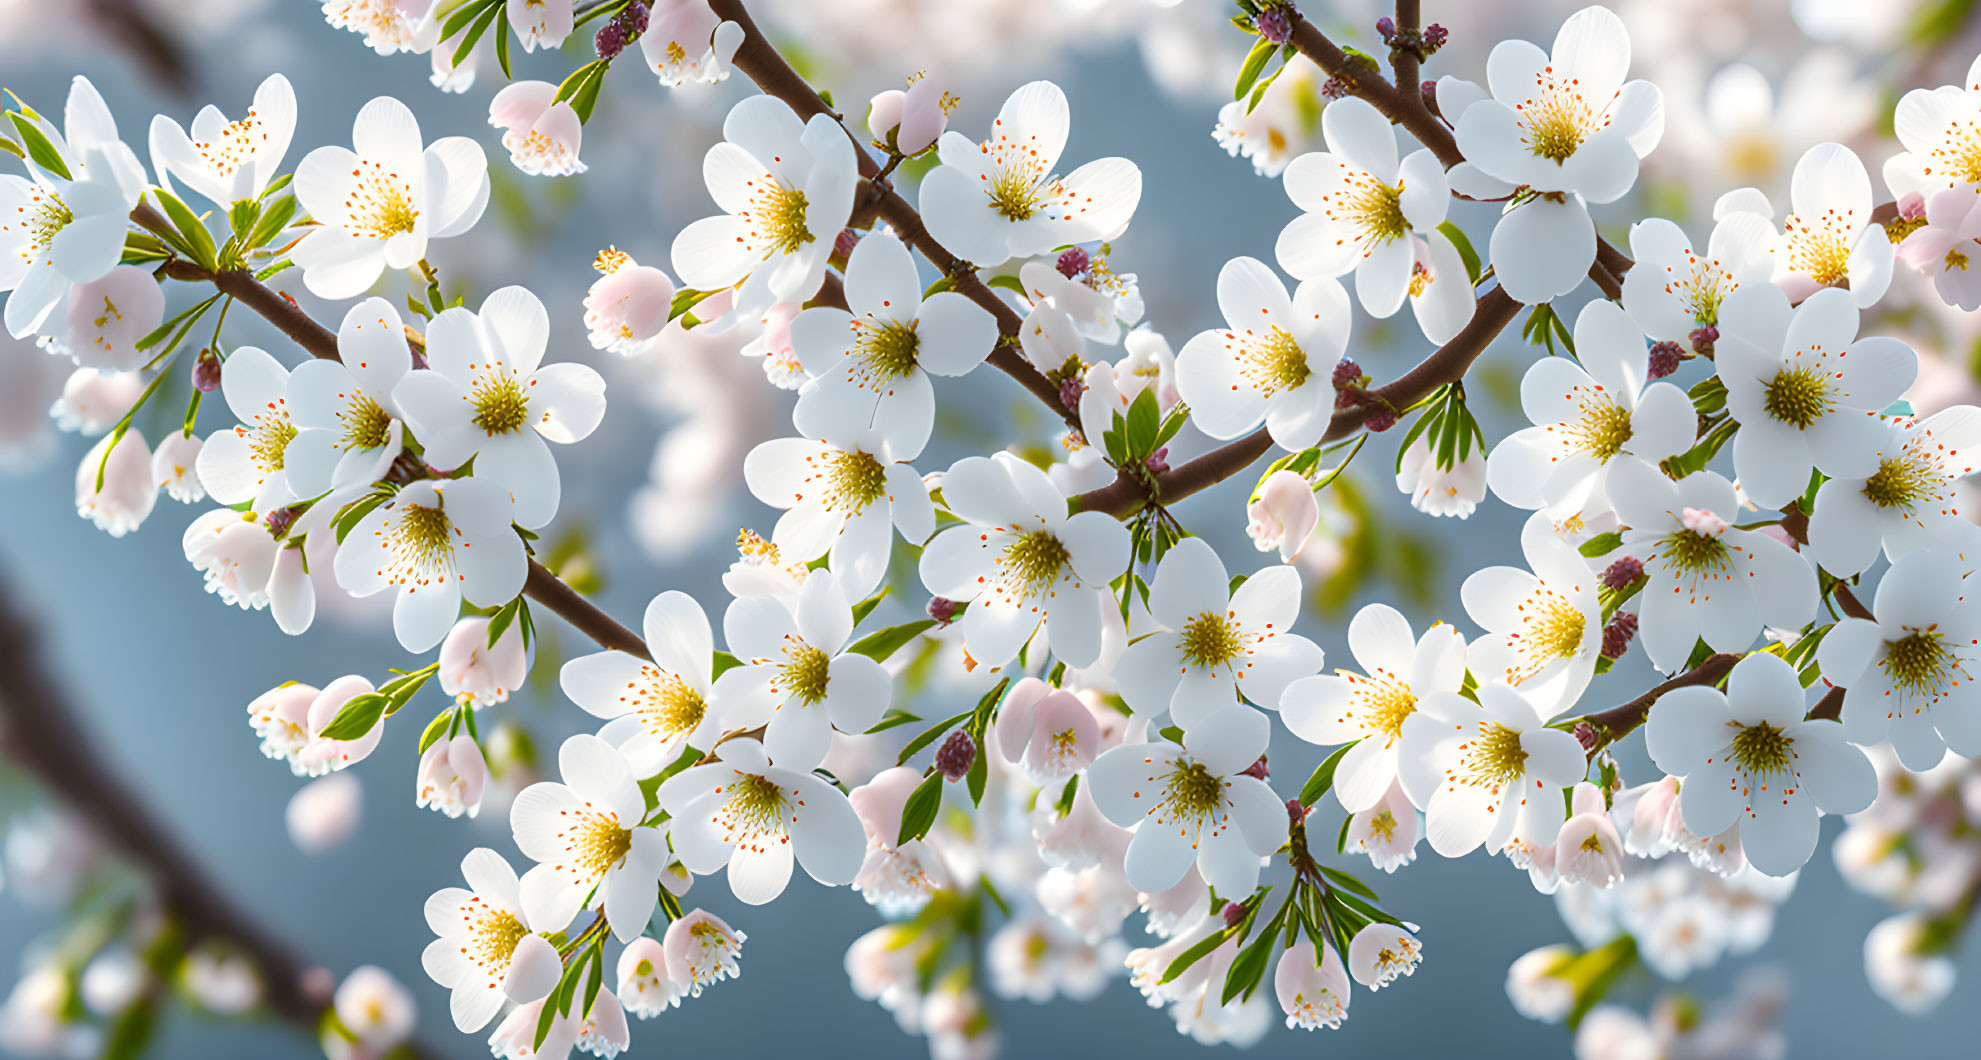 White Cherry Blossoms with Yellow Centers on Soft Blue Background